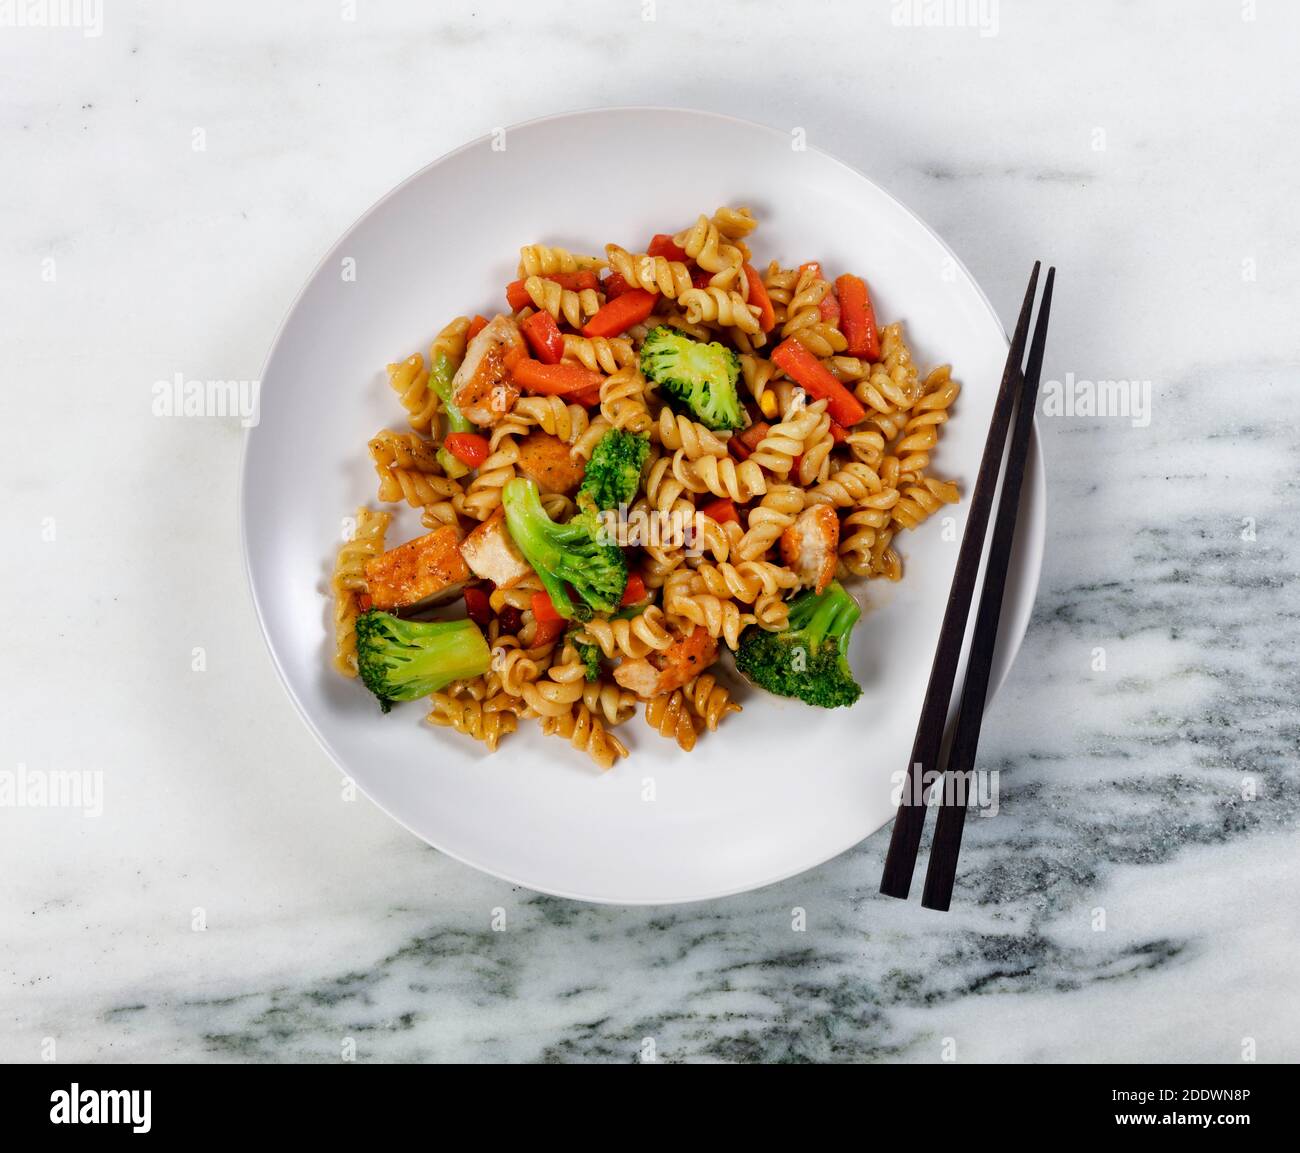 Close up of plate filled with healthy vegetables and noodles plus chopsticks as eating utensils Stock Photo